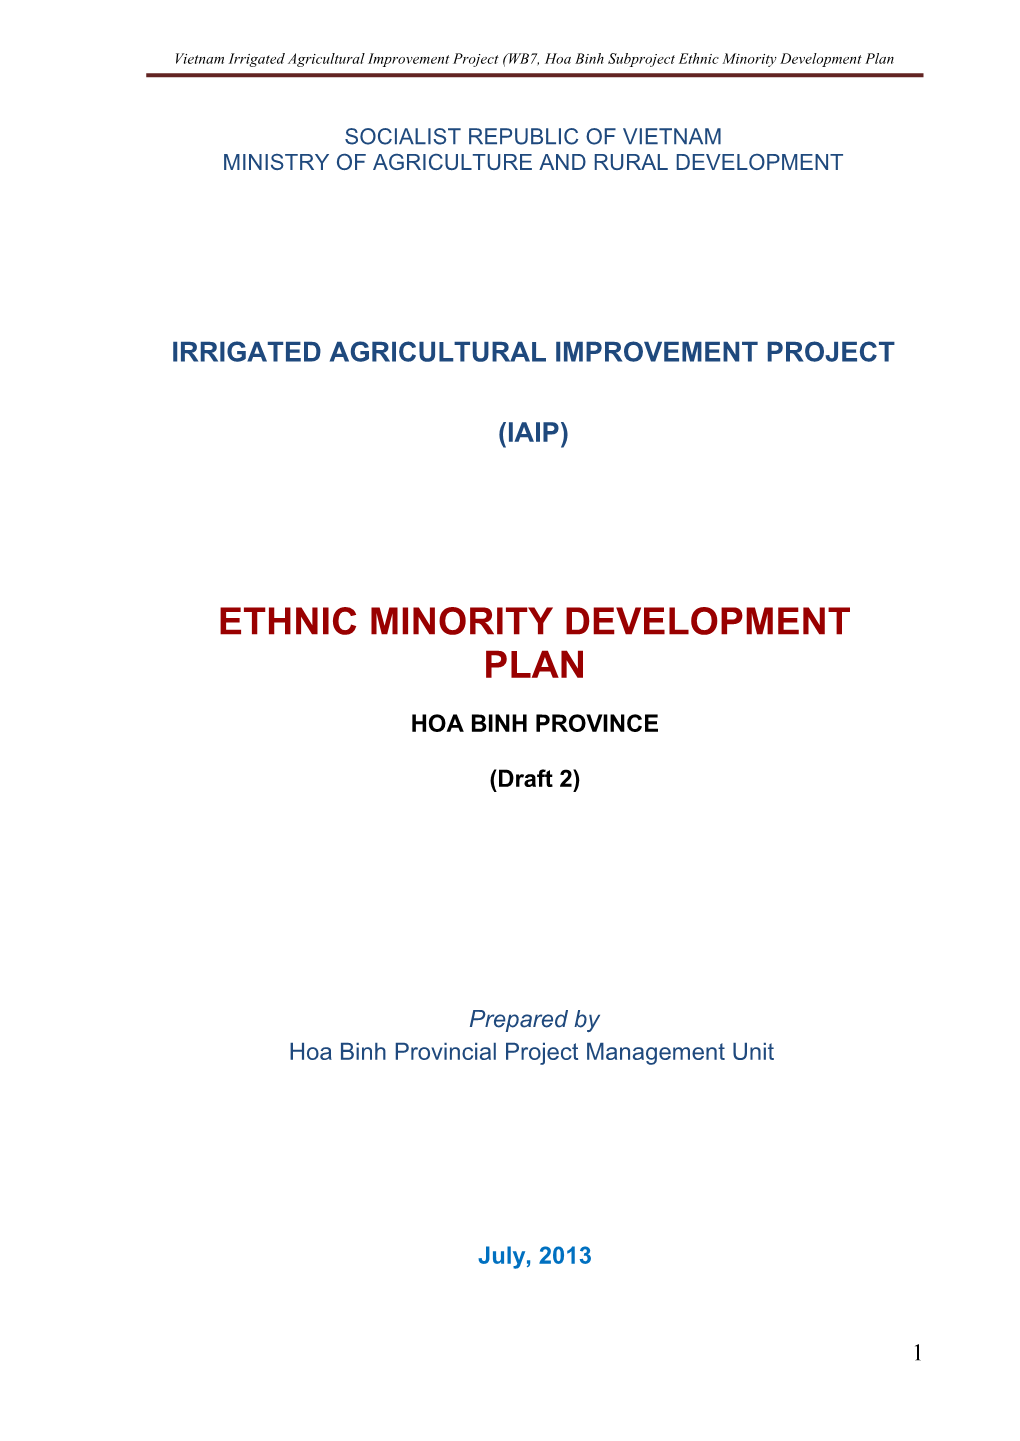 Vietnam Irrigated Agricultural Improvement Project (WB7, Hoa Binh Subproject Ethnic Minority